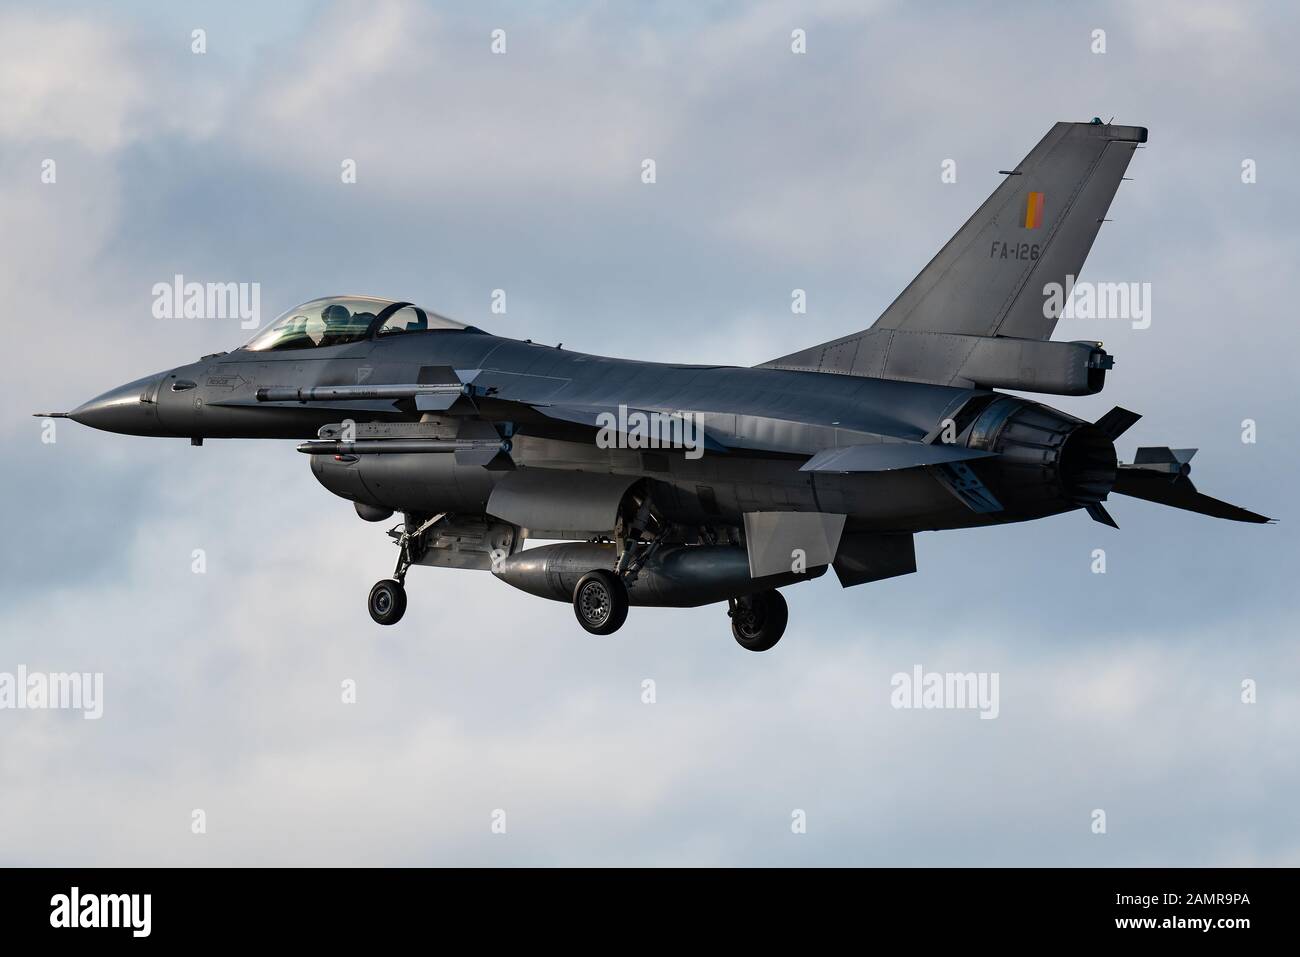 A General Dynamics F-16 Fighting Falcon fighter jet of the Belgian Air Force. Stock Photo